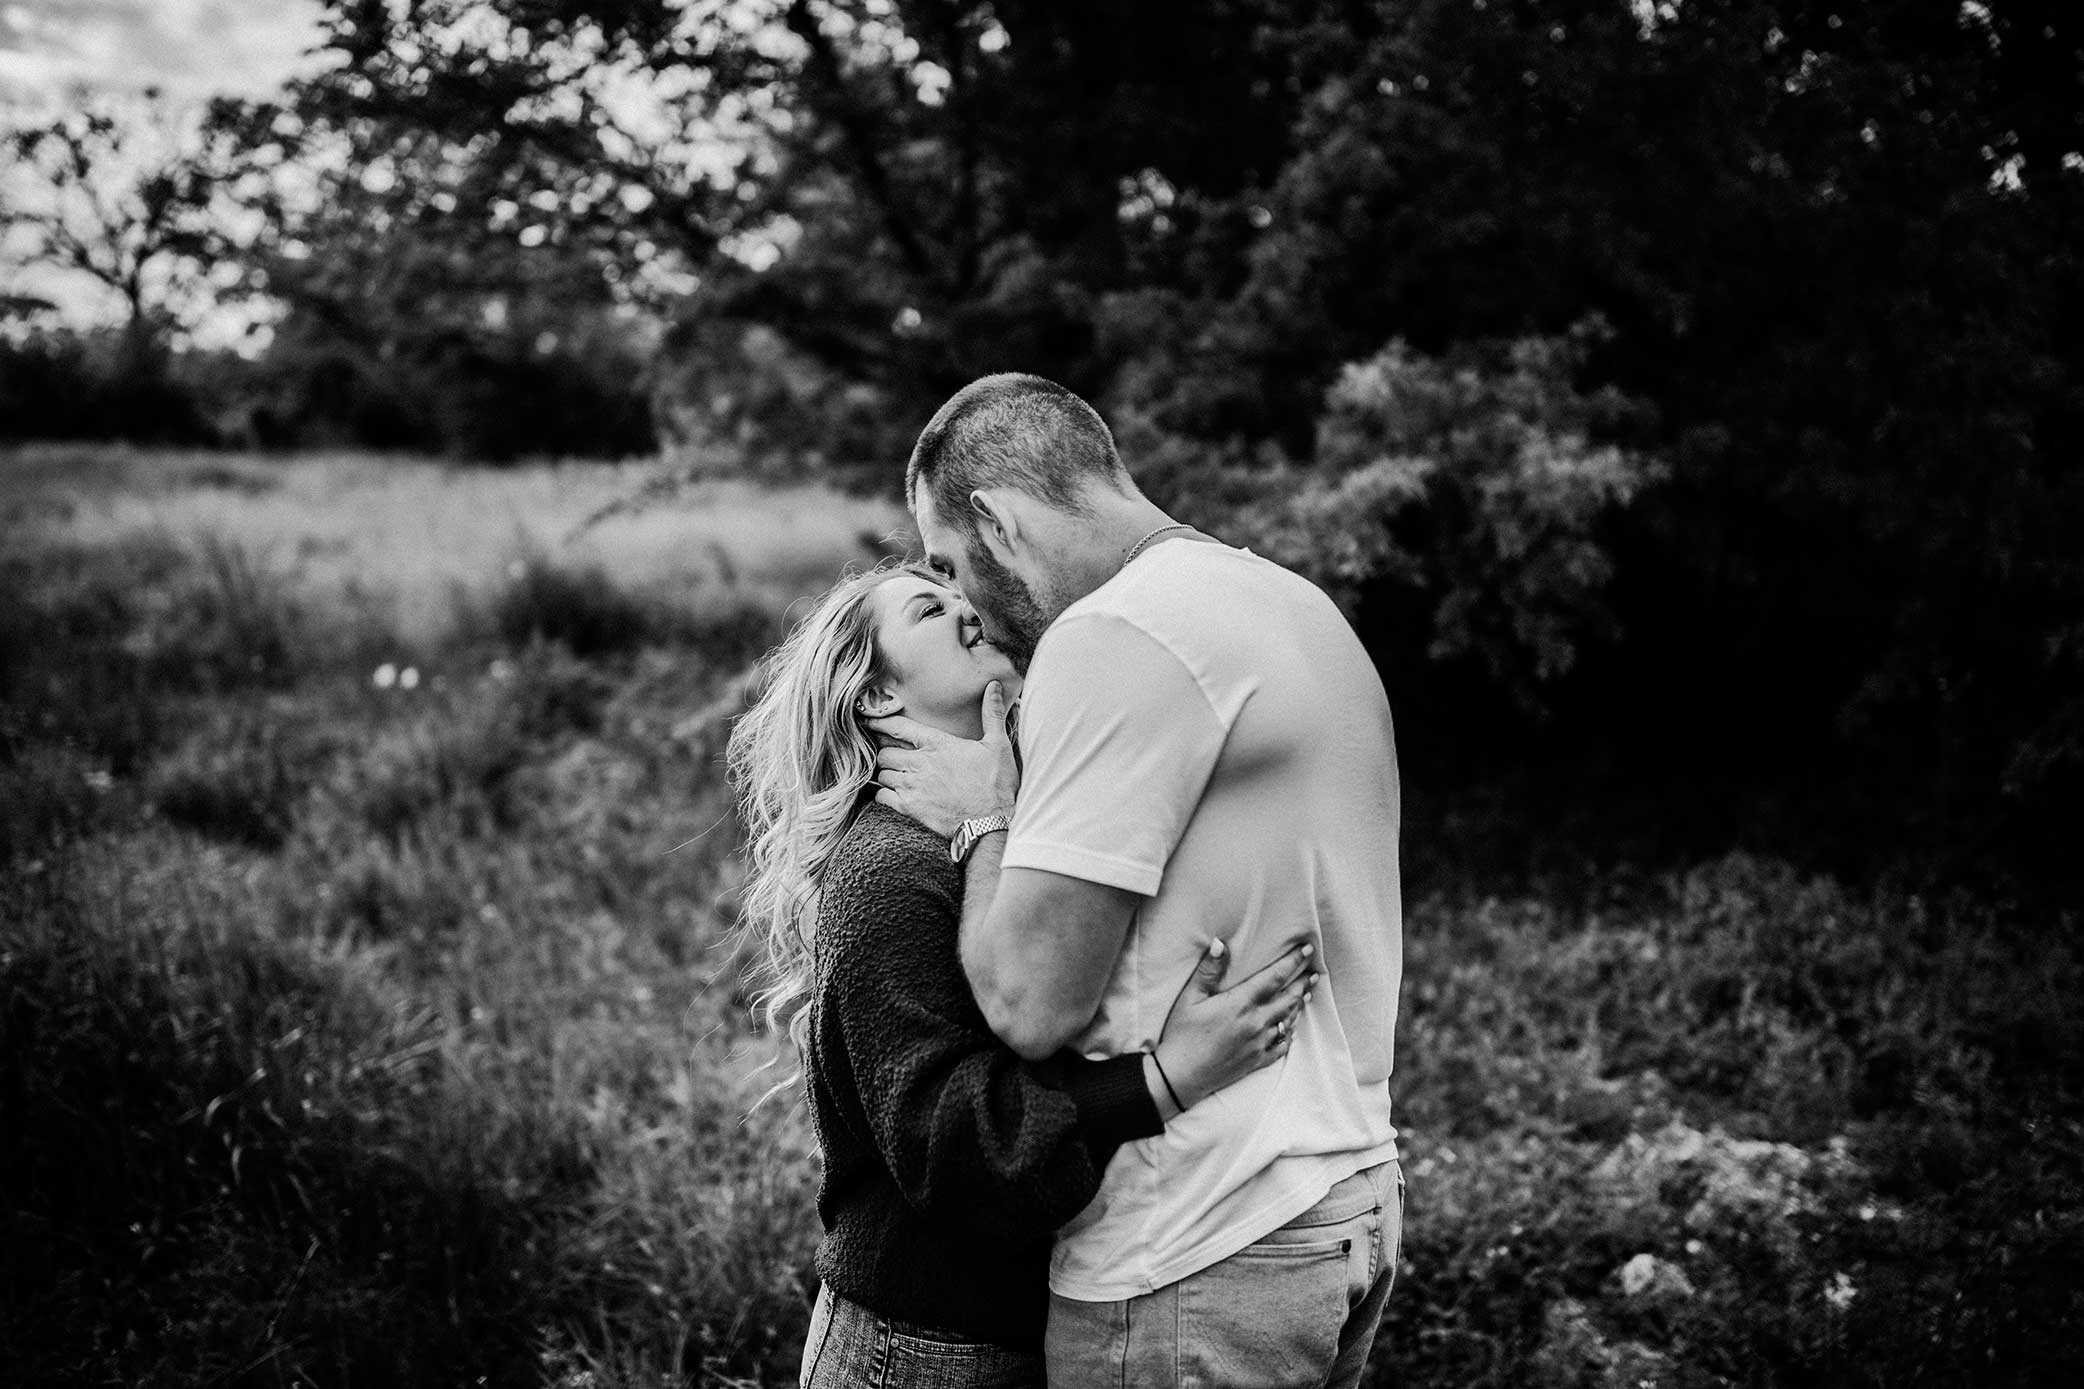 shelby-schiller-photography-lifestyle-couples-remi-colt-outdoor-jeep-adventure-31.jpg